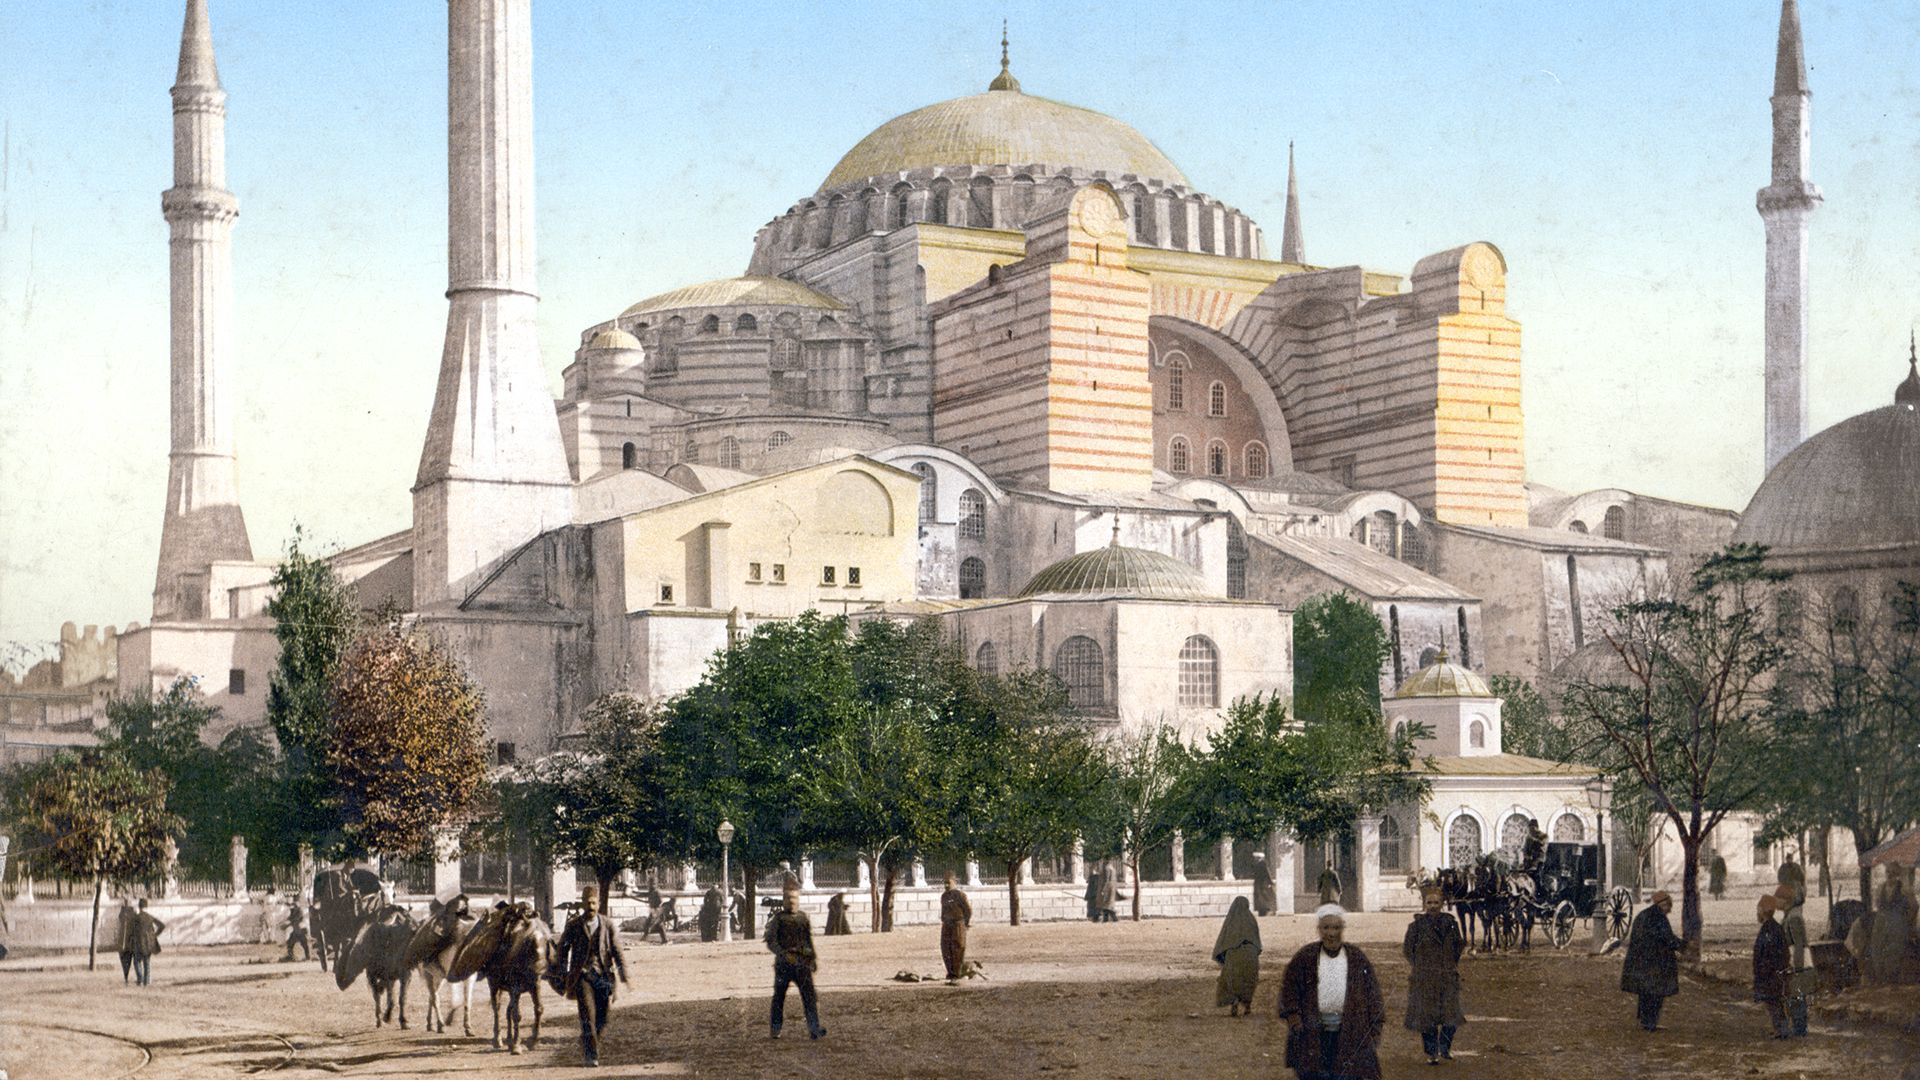 The historical significance of the Hagia Sophia